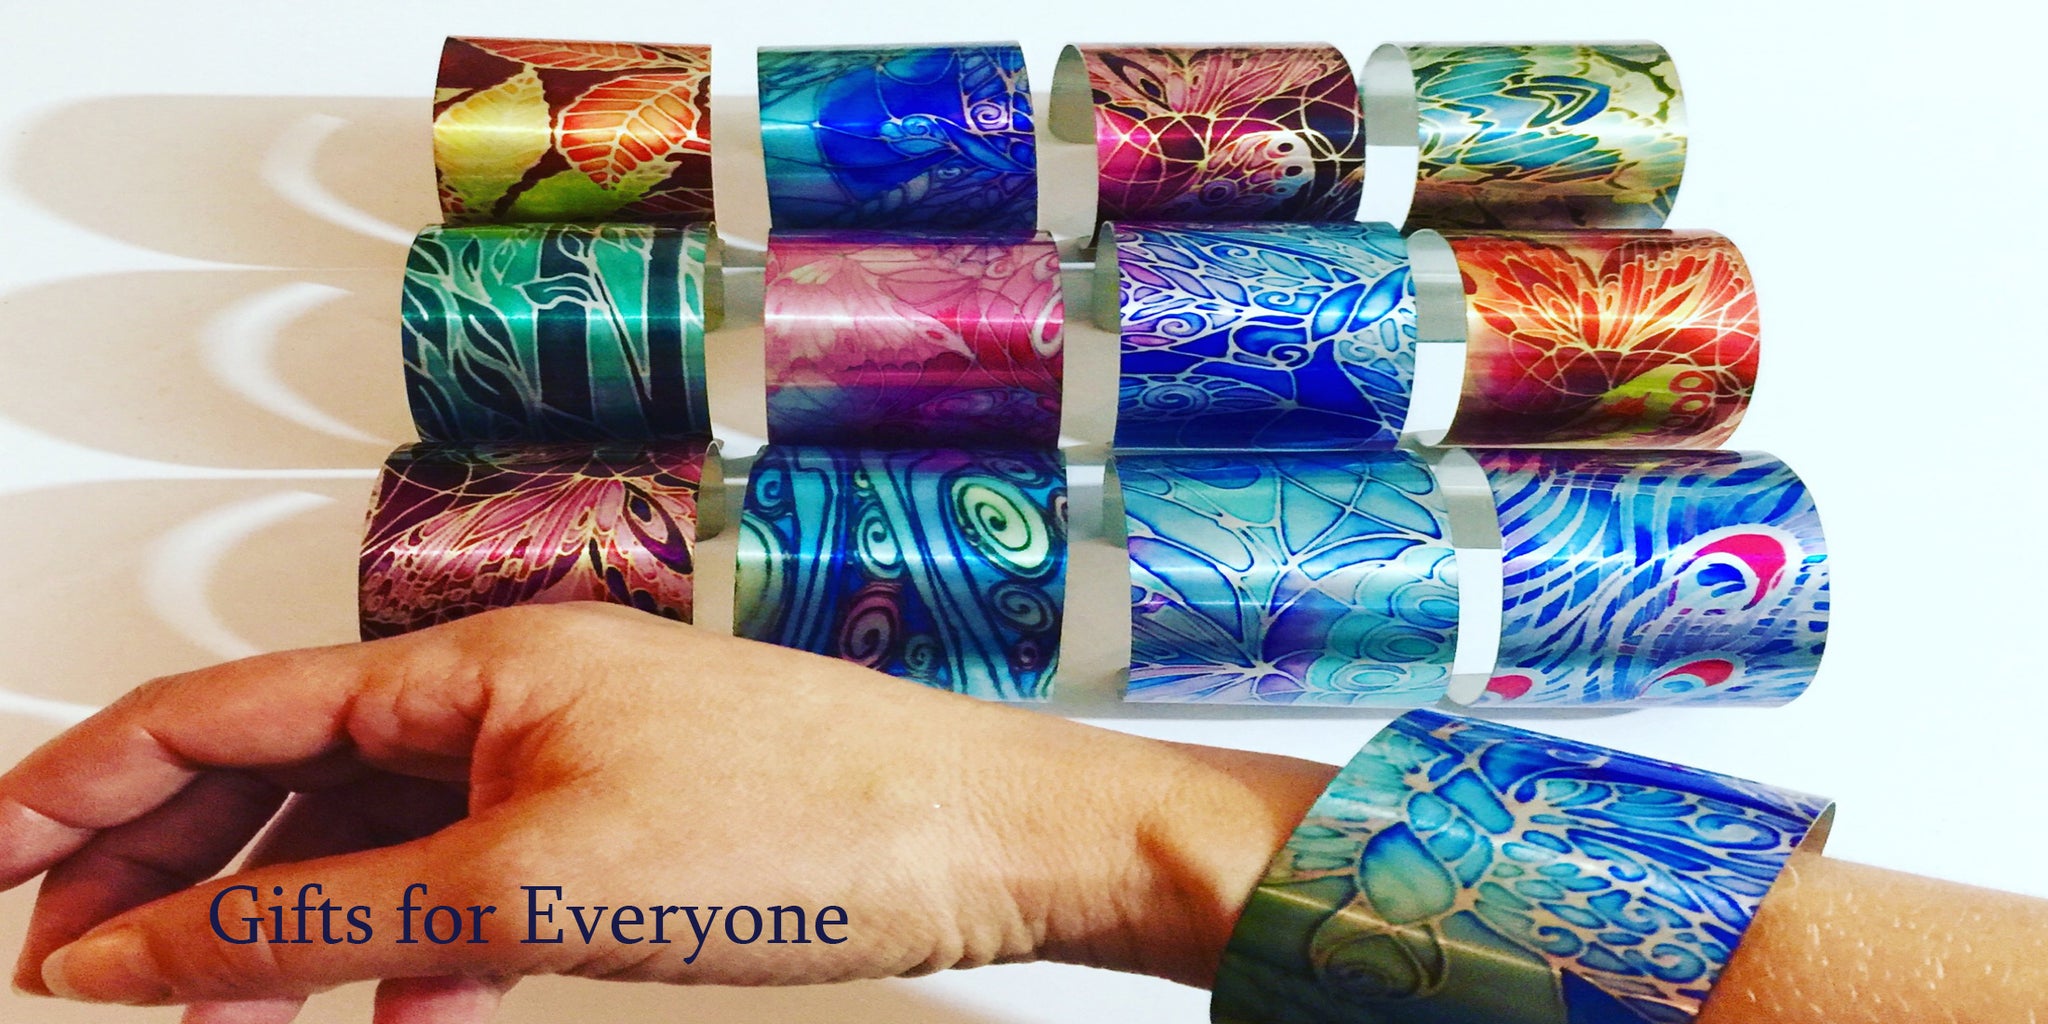 Gifts for Everyone, Bracelets, Mugs, Coasters, Glasses Cases, Phone covers, Meikie Designs